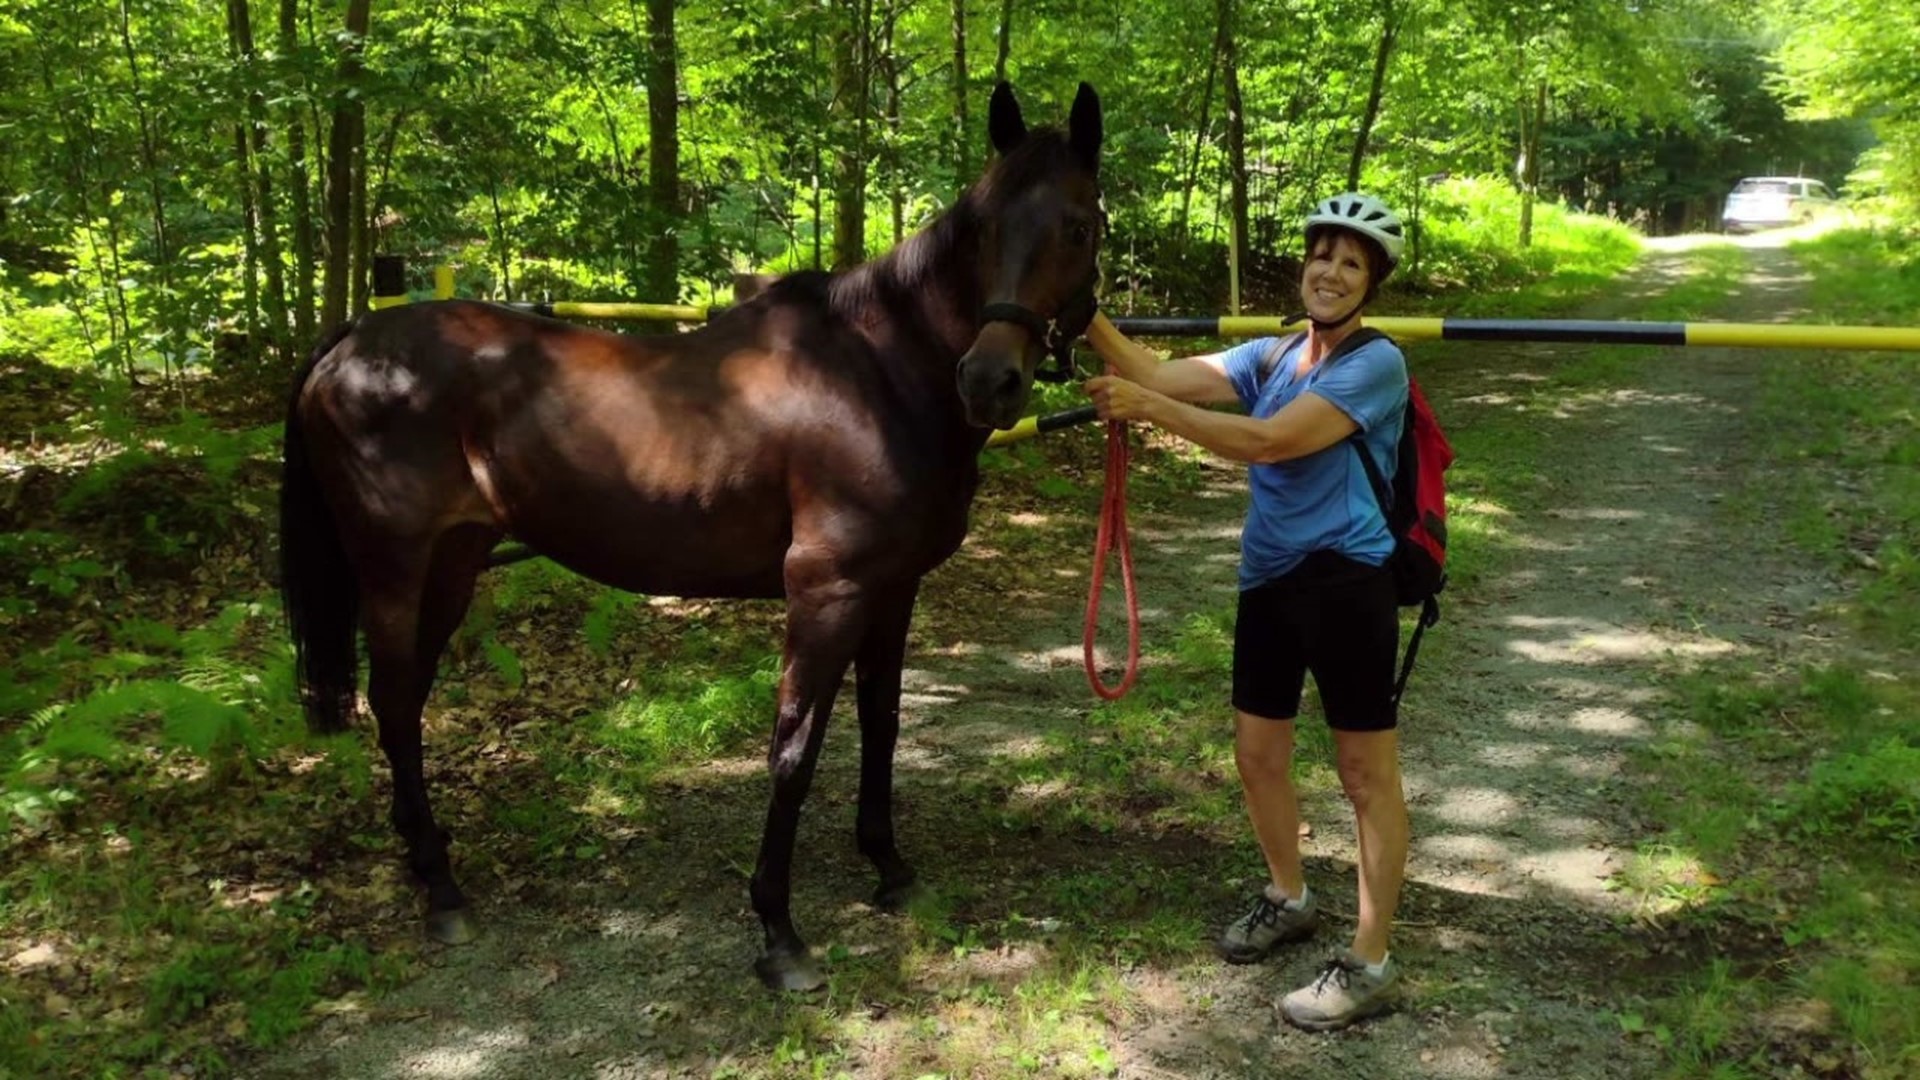 A 20-year-old horse went missing in Promised Land State Park.